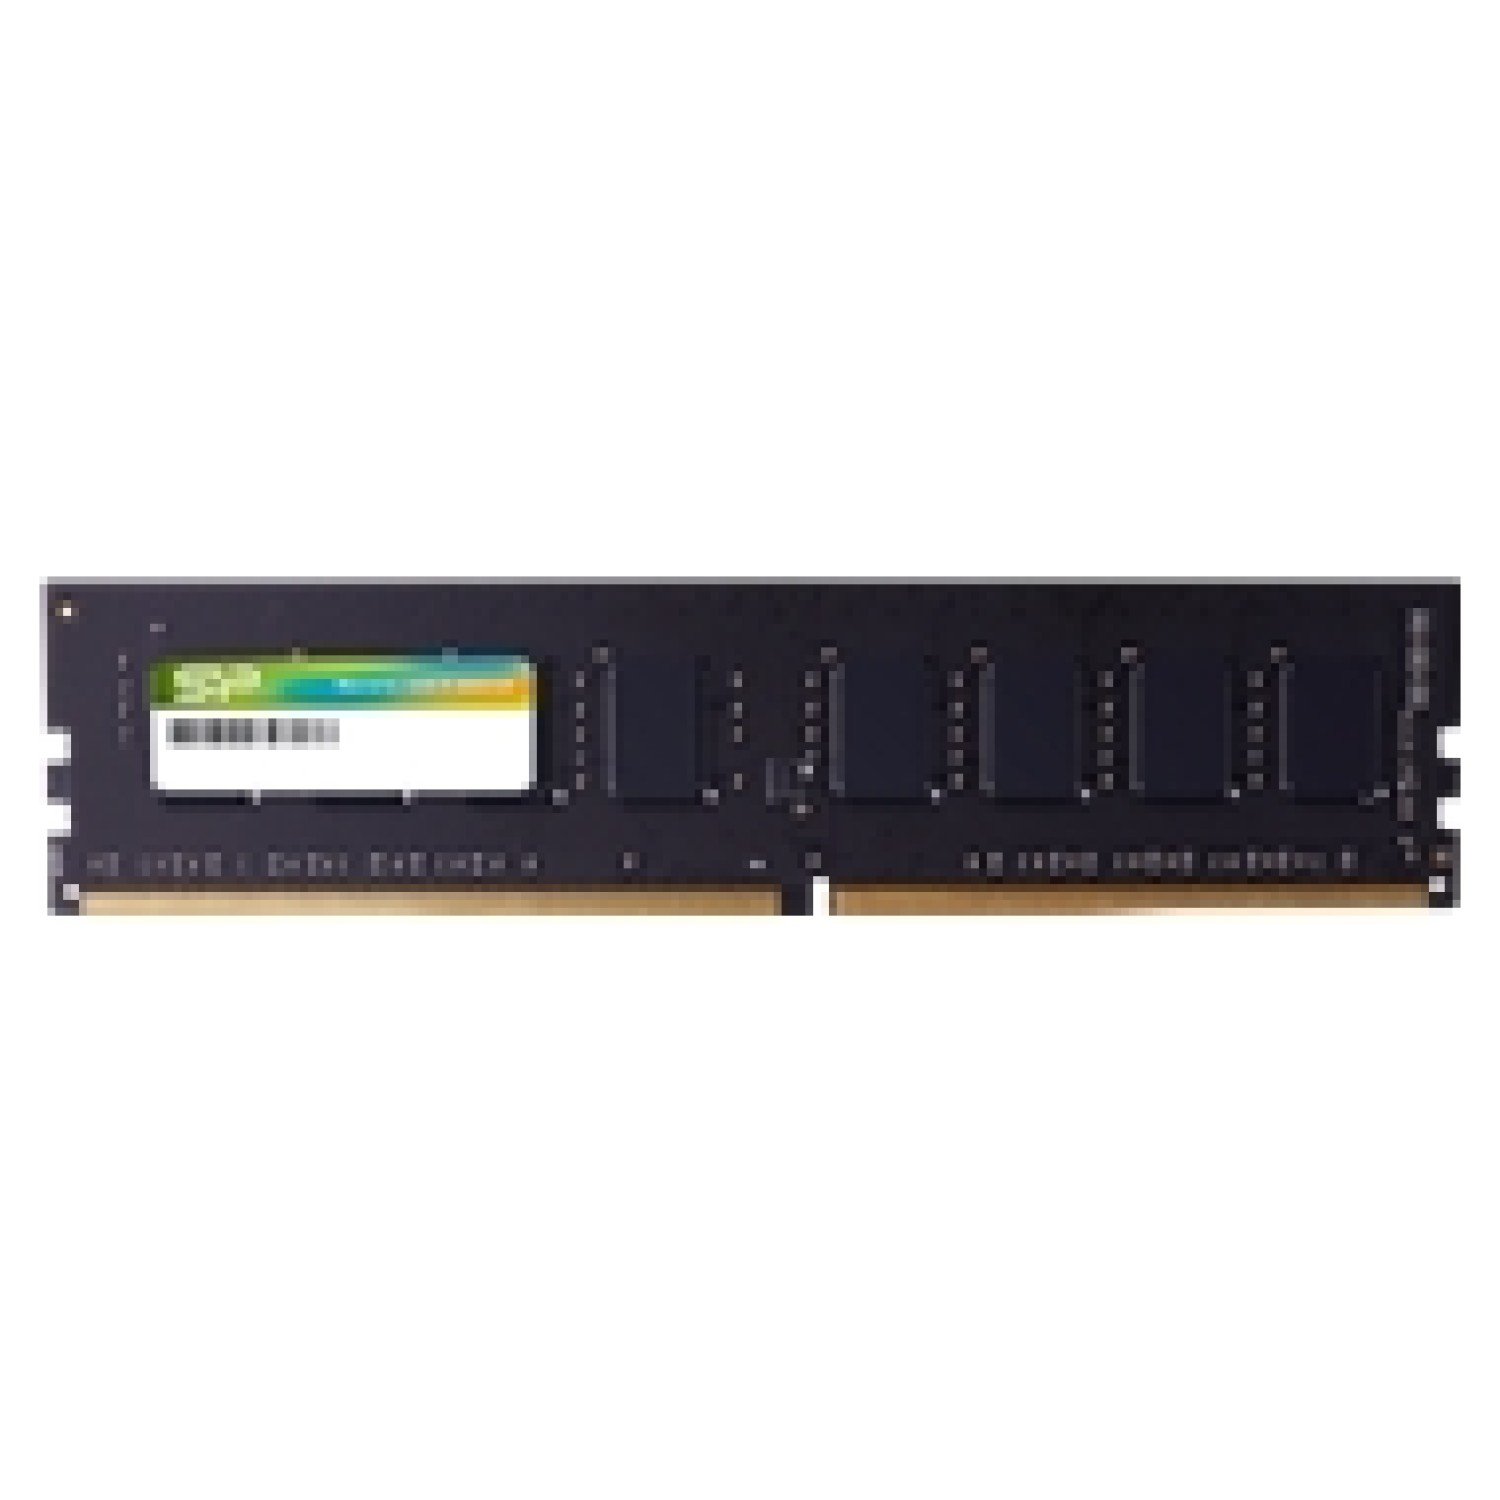 SILICON POWER DDR4 8GB 3200MHz CL22 DIMM